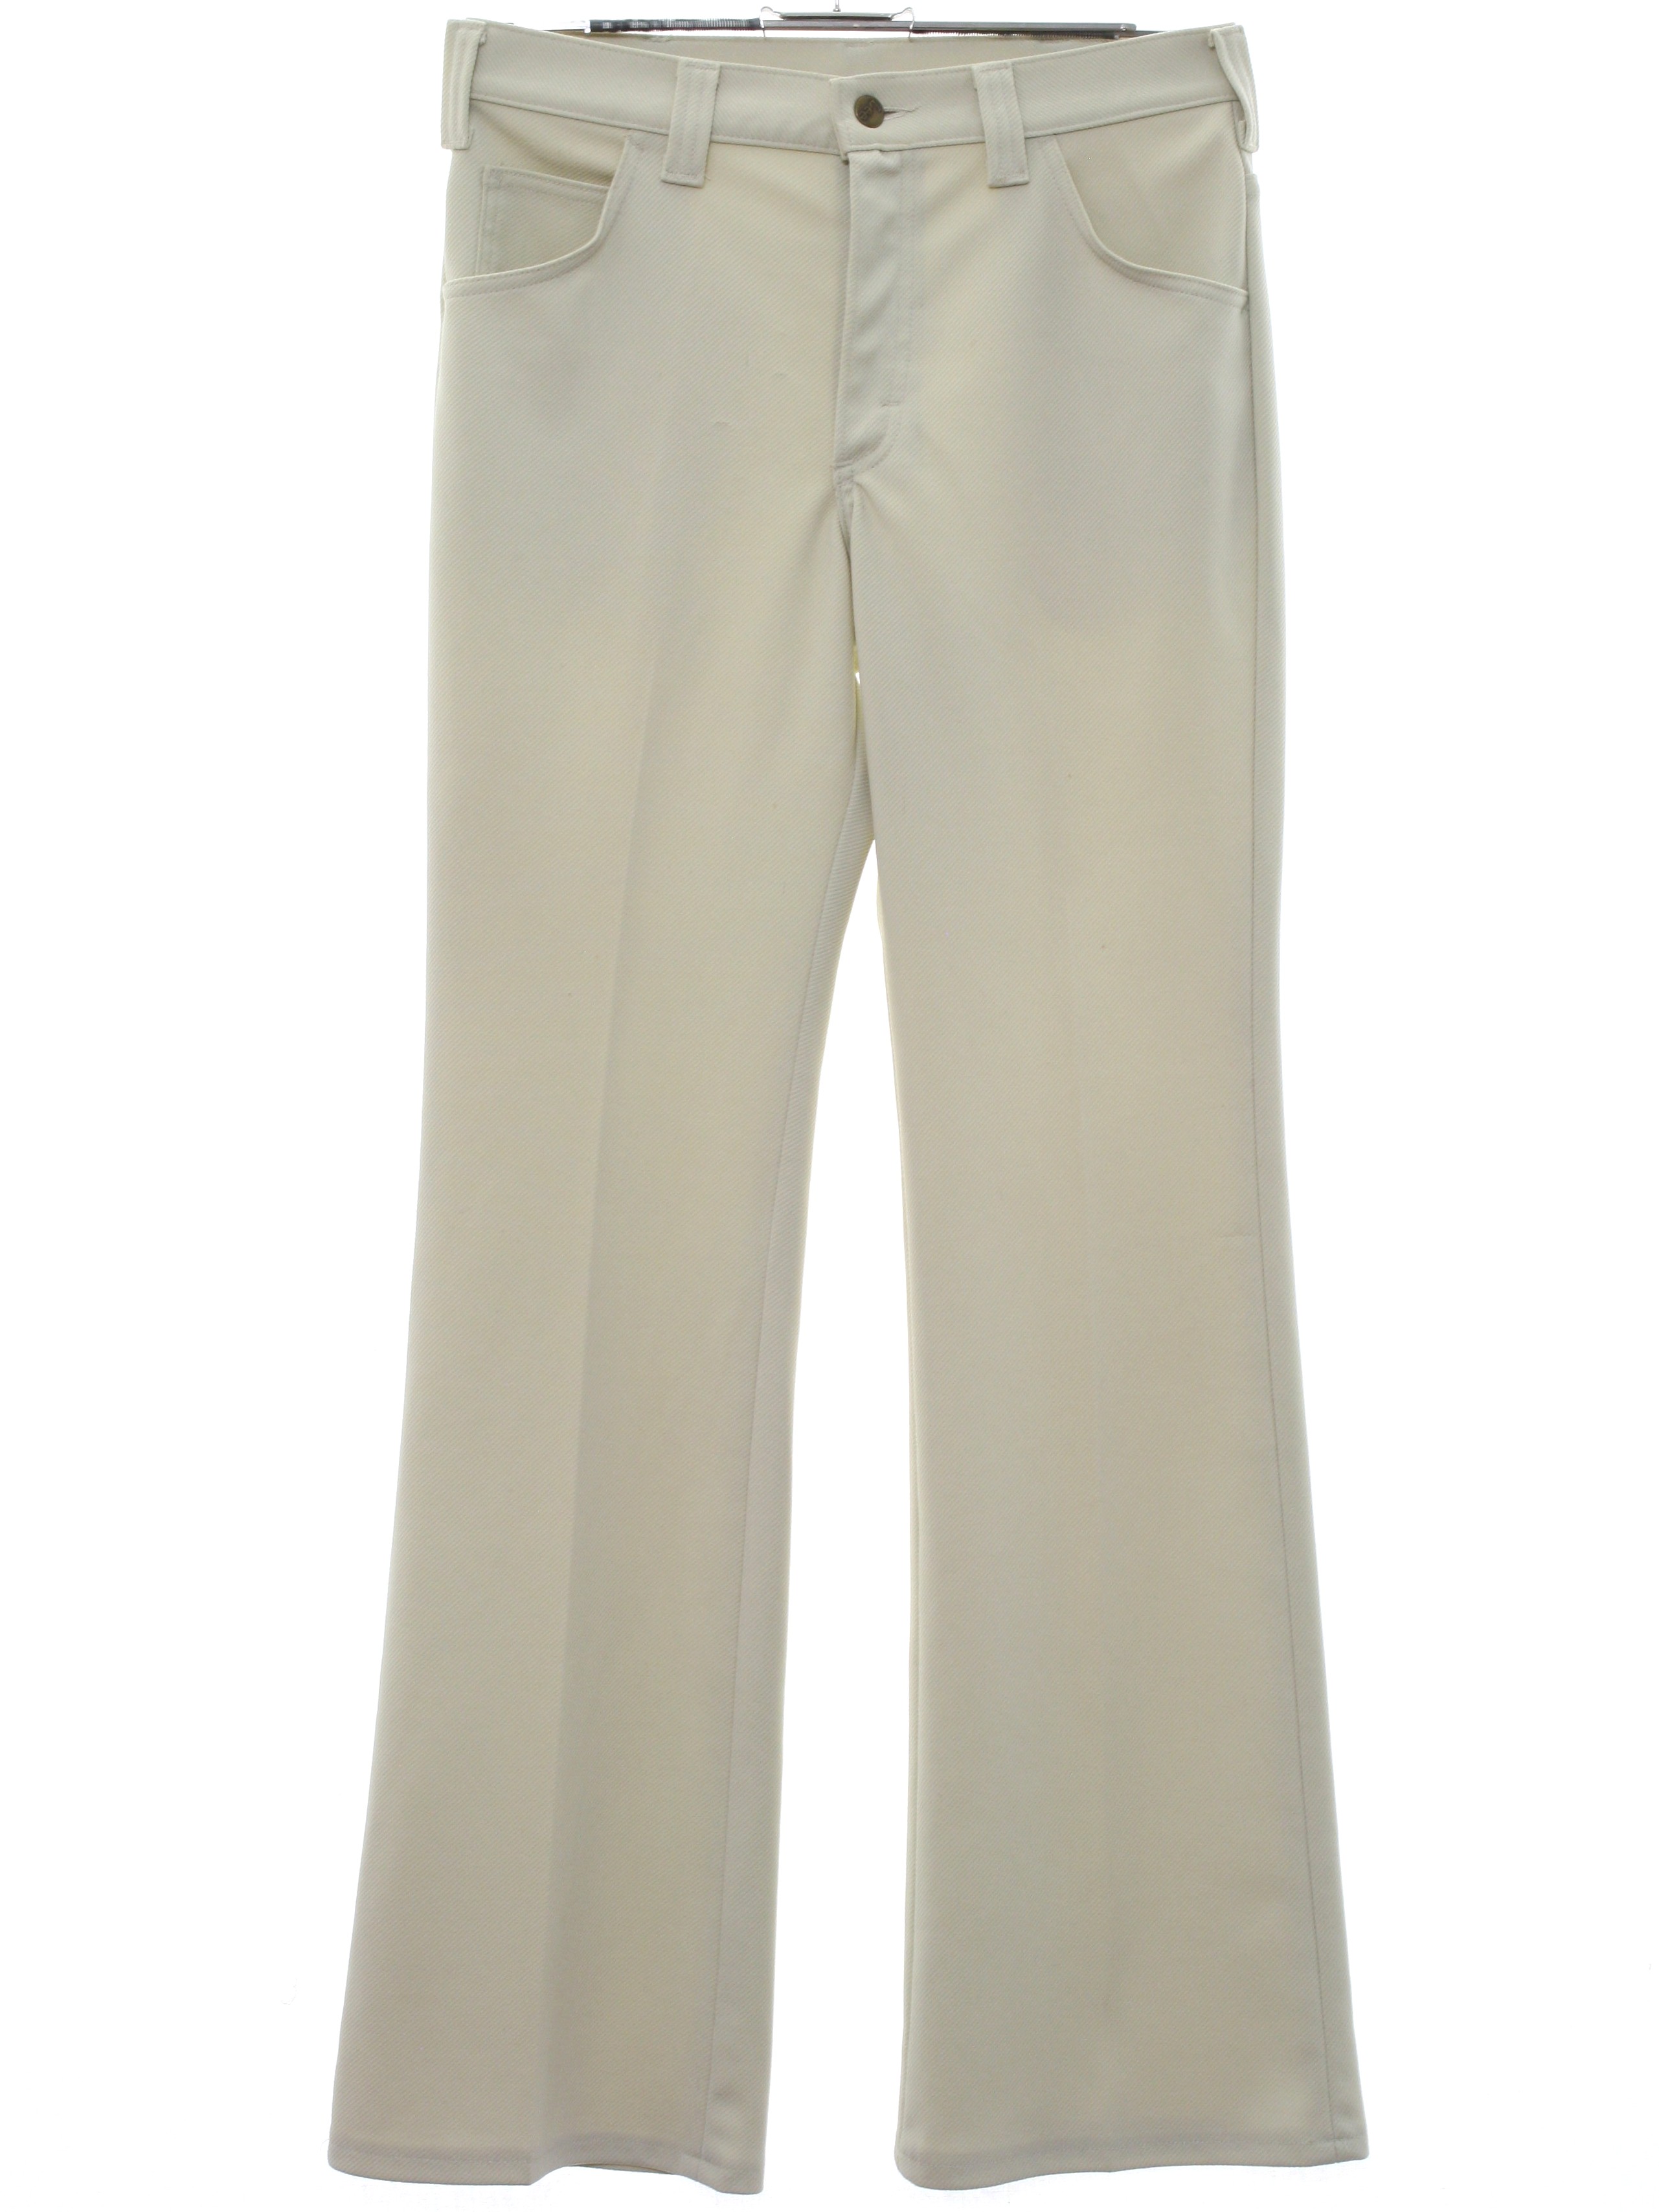 1970s Vintage Flared Pants / Flares: 70s -Lee- Mens Cream solid colored ...